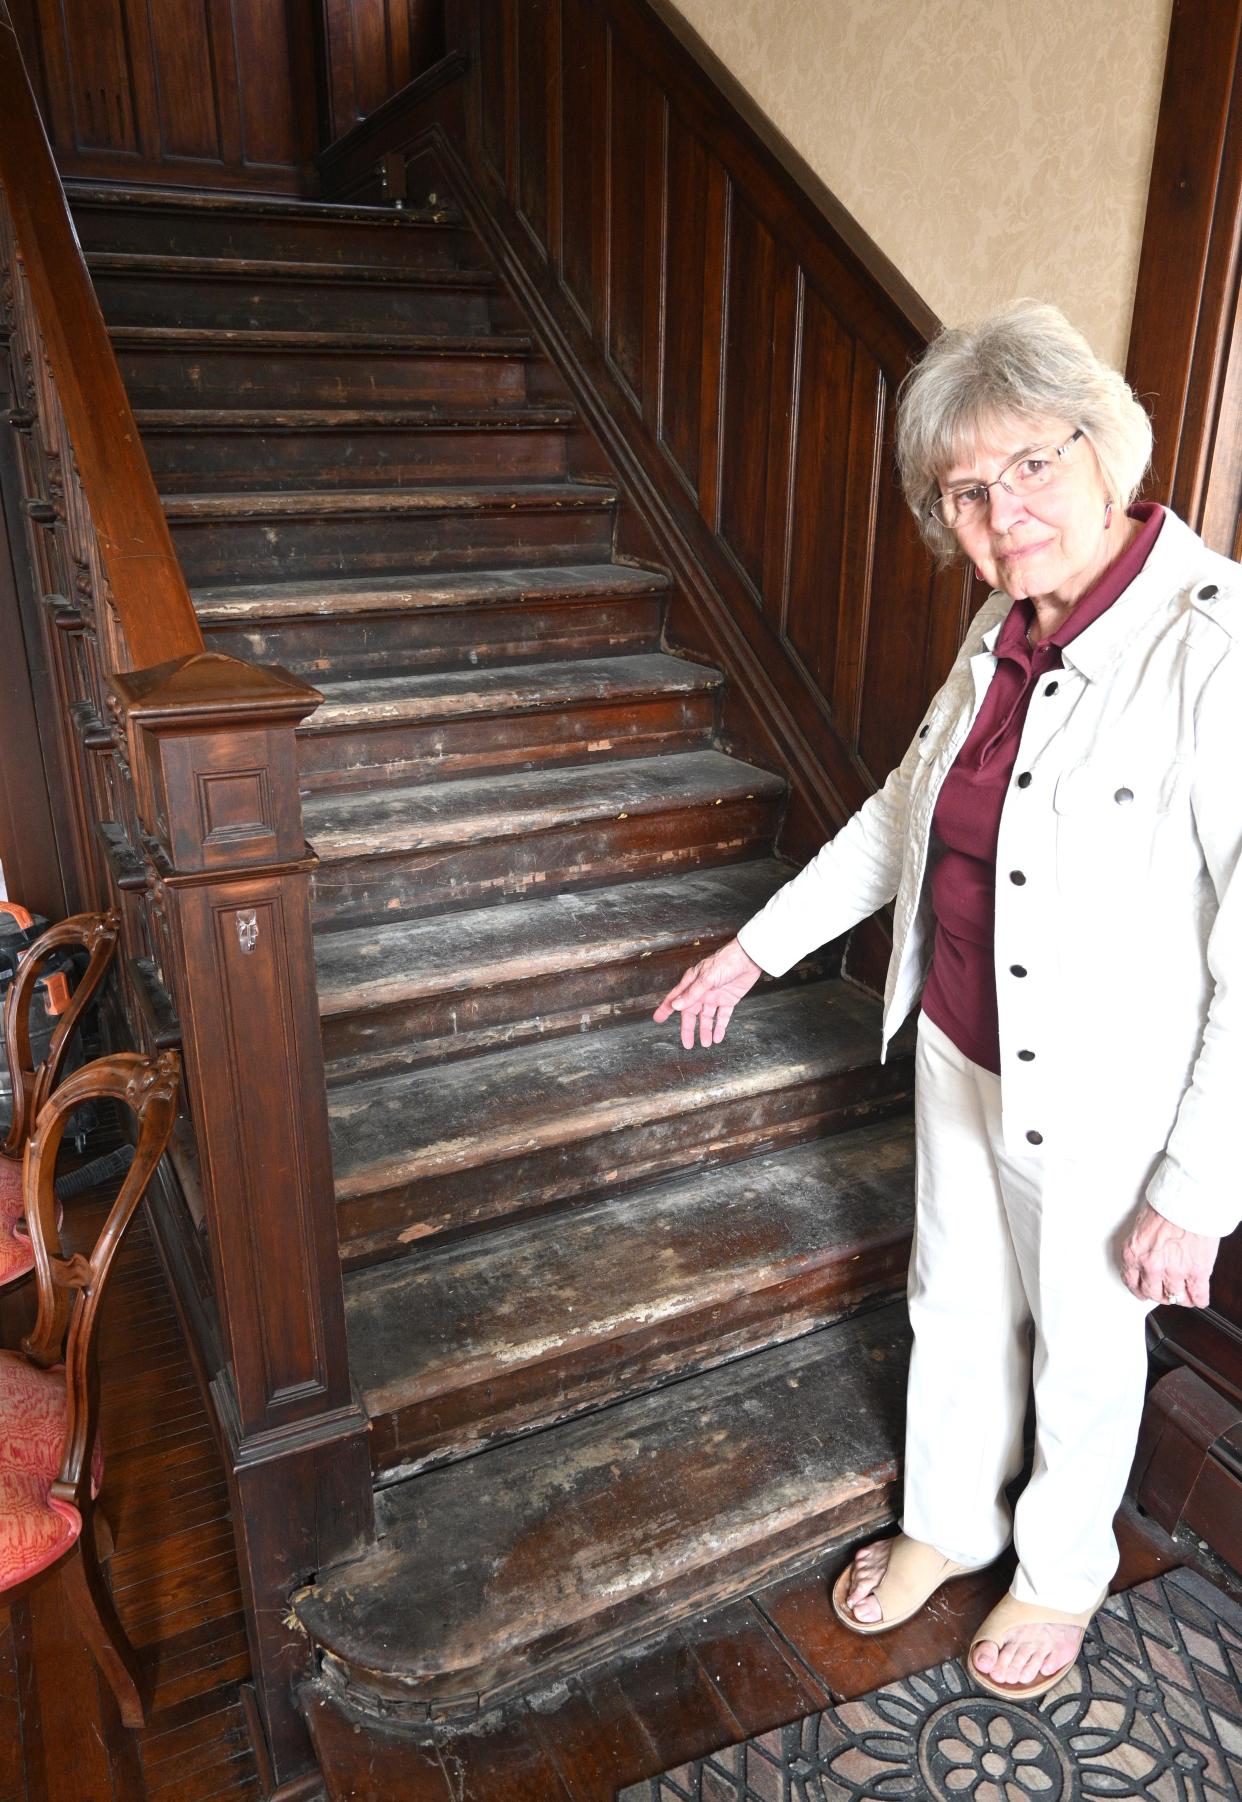 Kathie Bappert shows the stairs to the second story that need restoration.